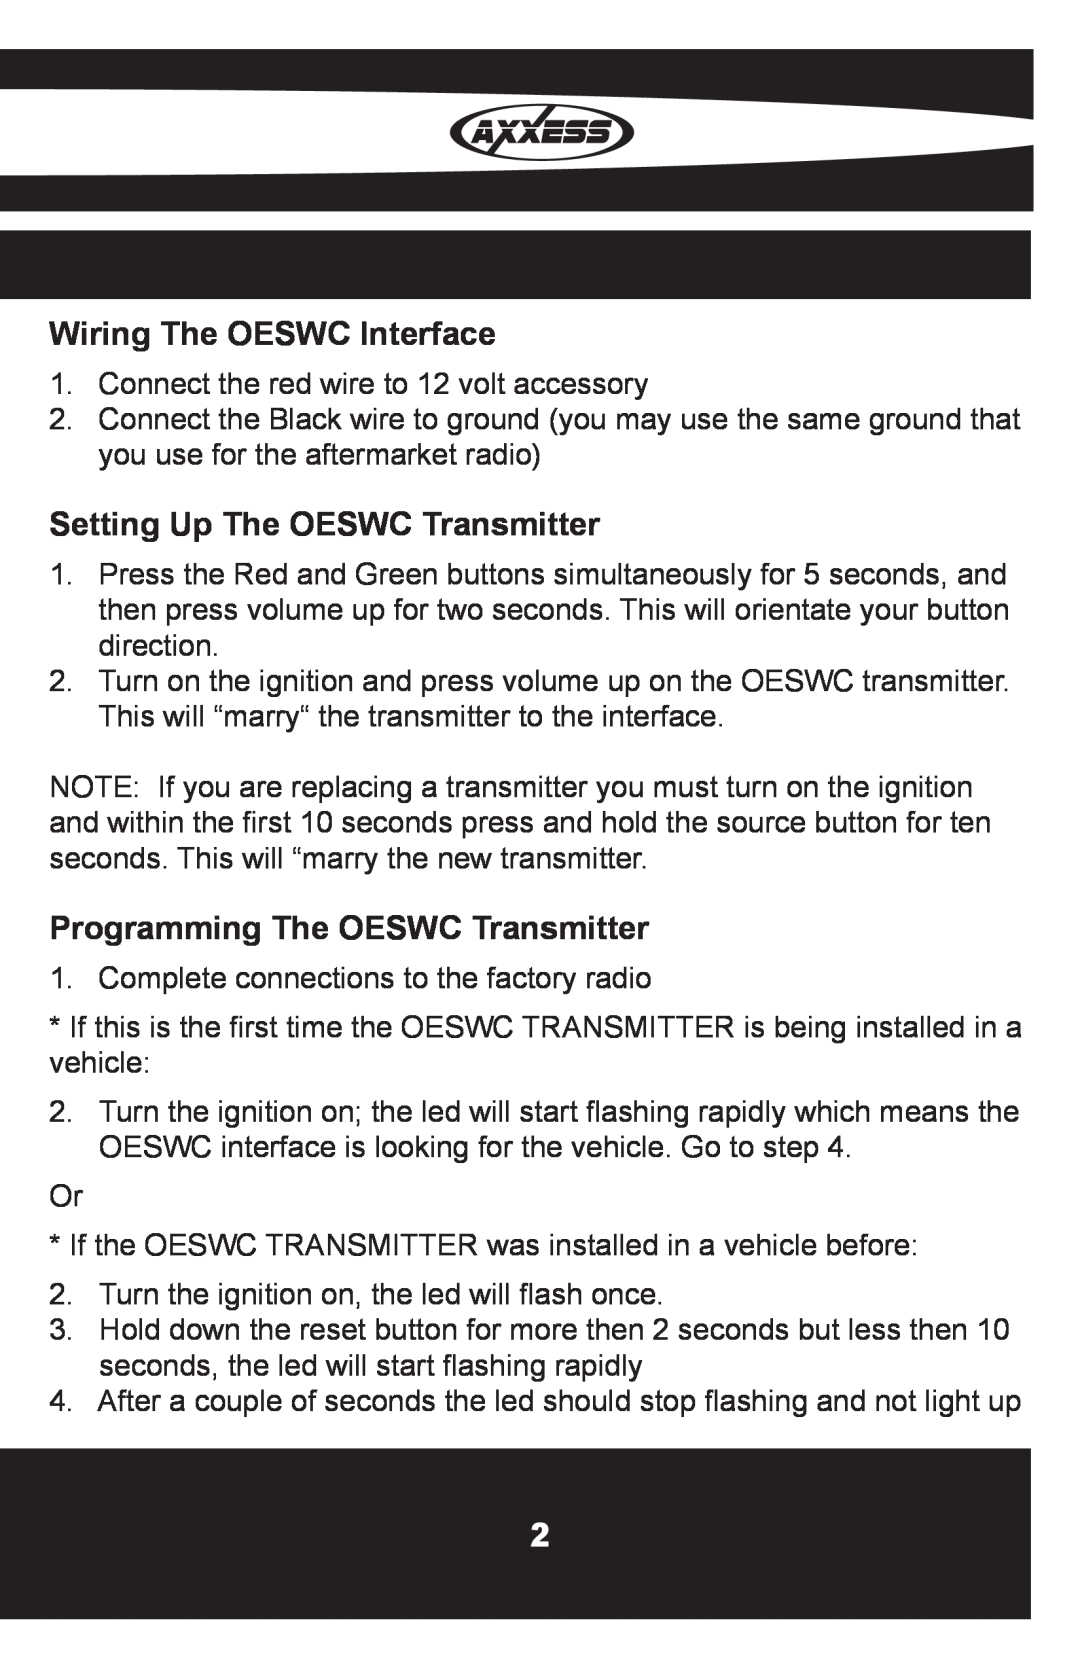 Axxess Interface OESWC-LAN29-RF installation instructions Wiring The OESWC Interface, Setting Up The OESWC Transmitter 